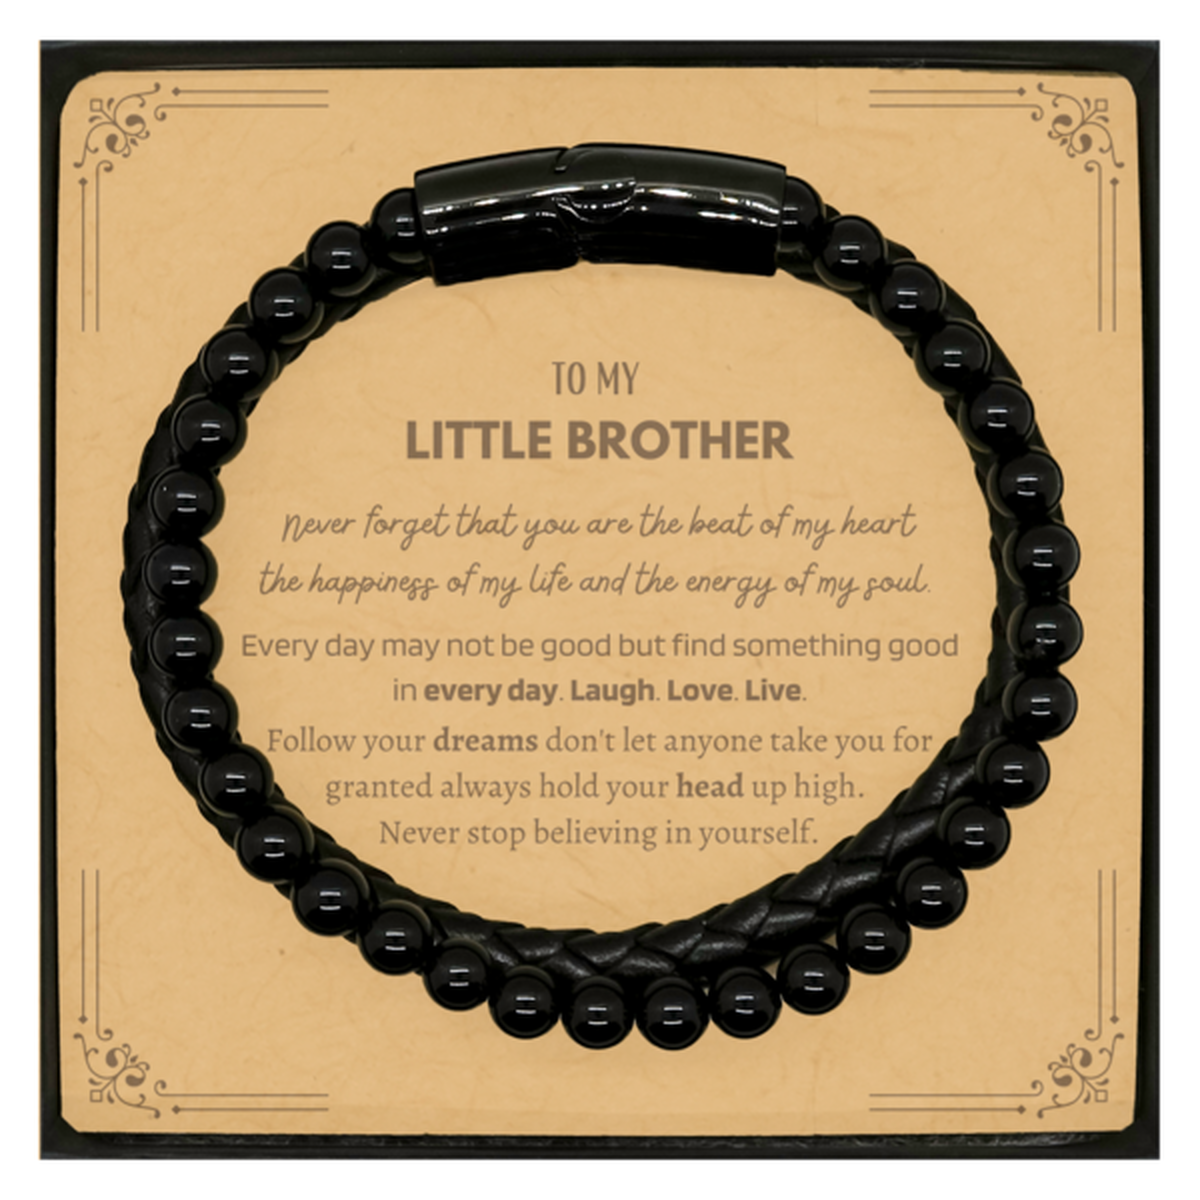 To My Little Brother Message Card Gifts, Christmas Little Brother Stone Leather Bracelets Present, Birthday Unique Motivational For Little Brother, To My Little Brother Never forget that you are the beat of my heart the happiness of my life and the energy